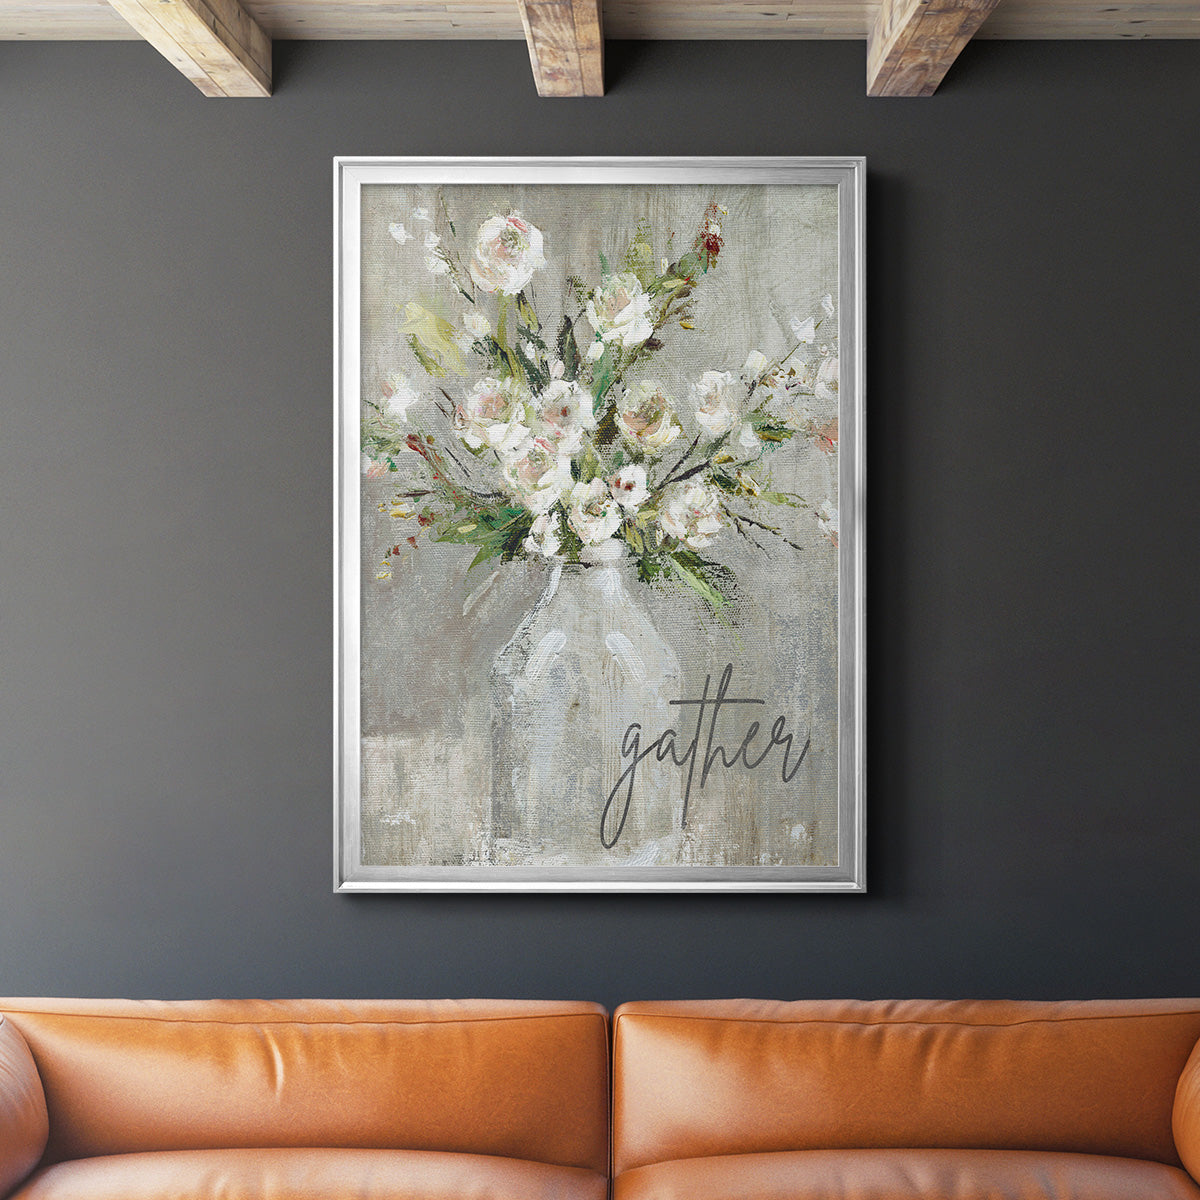 Gather Premium Framed Print - Ready to Hang